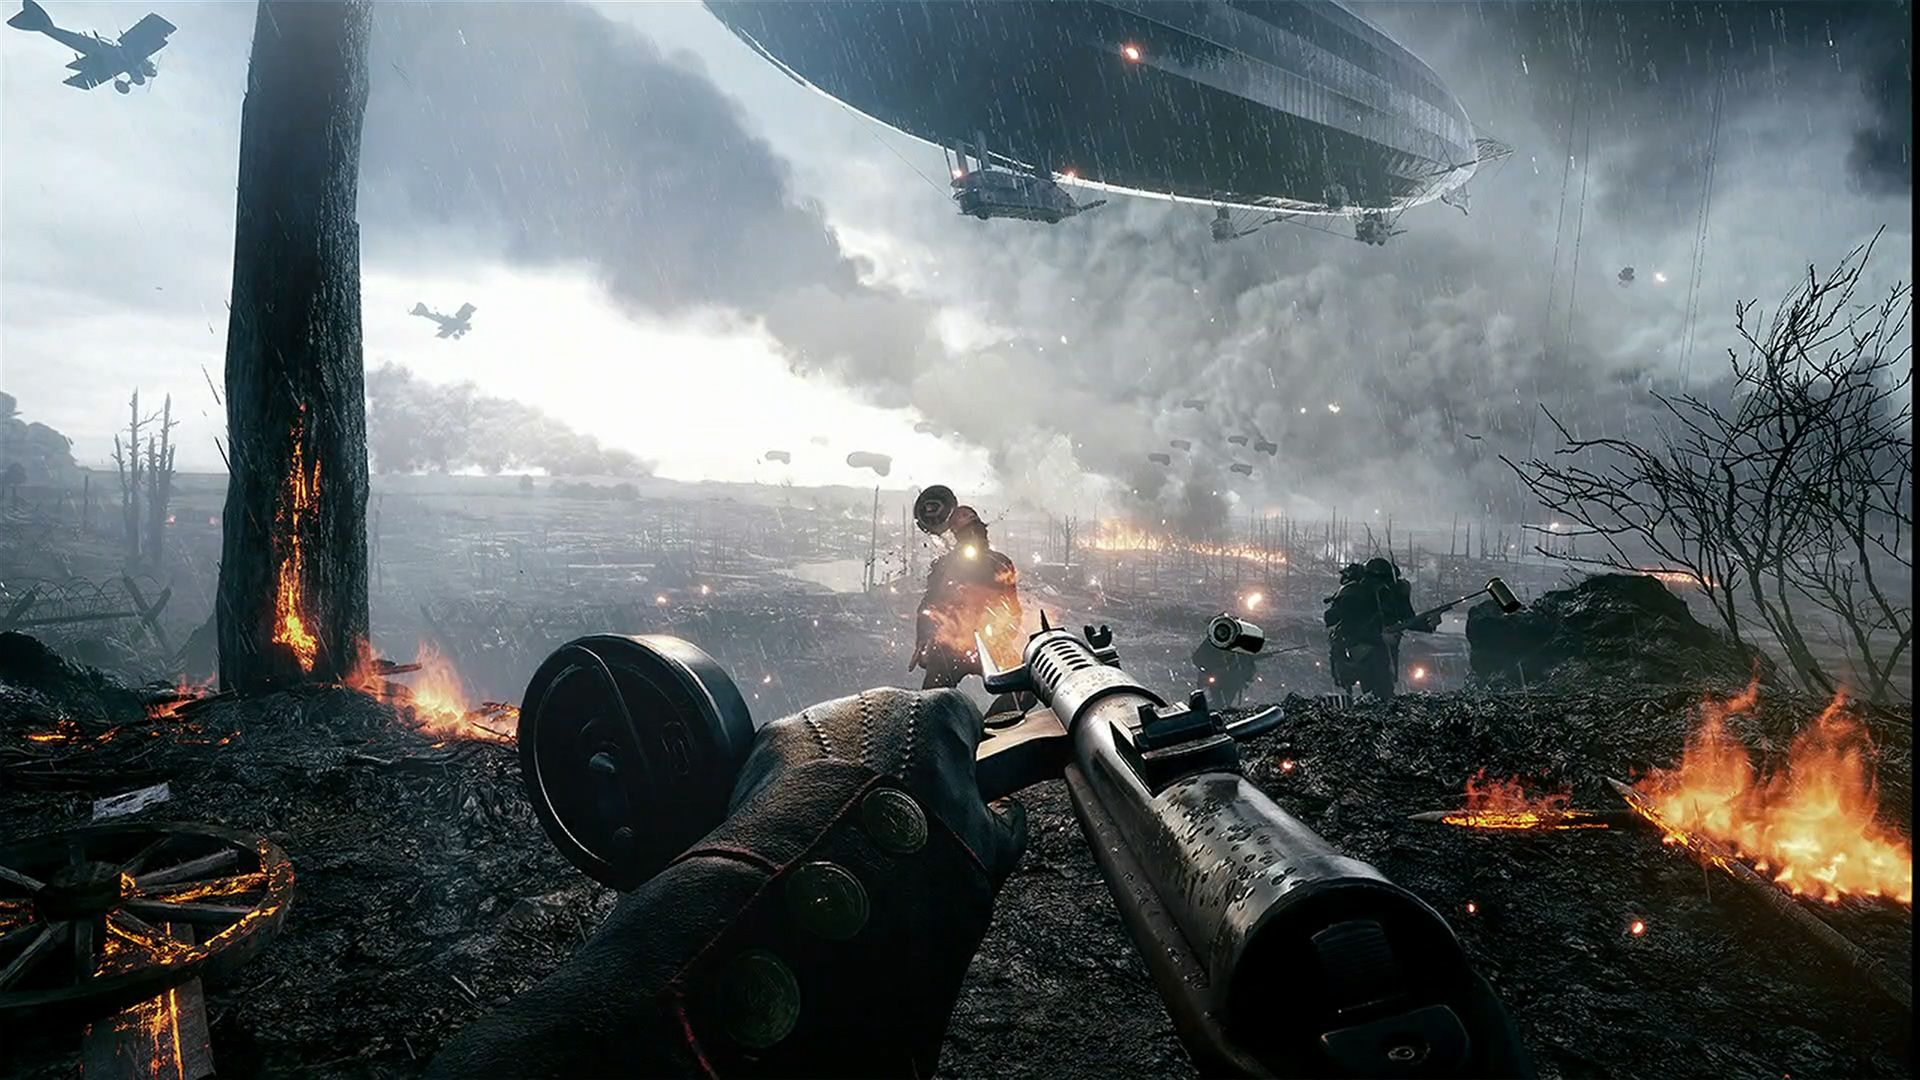 15 Reasons Battlefield Is WAY Better Than Call Of Duty